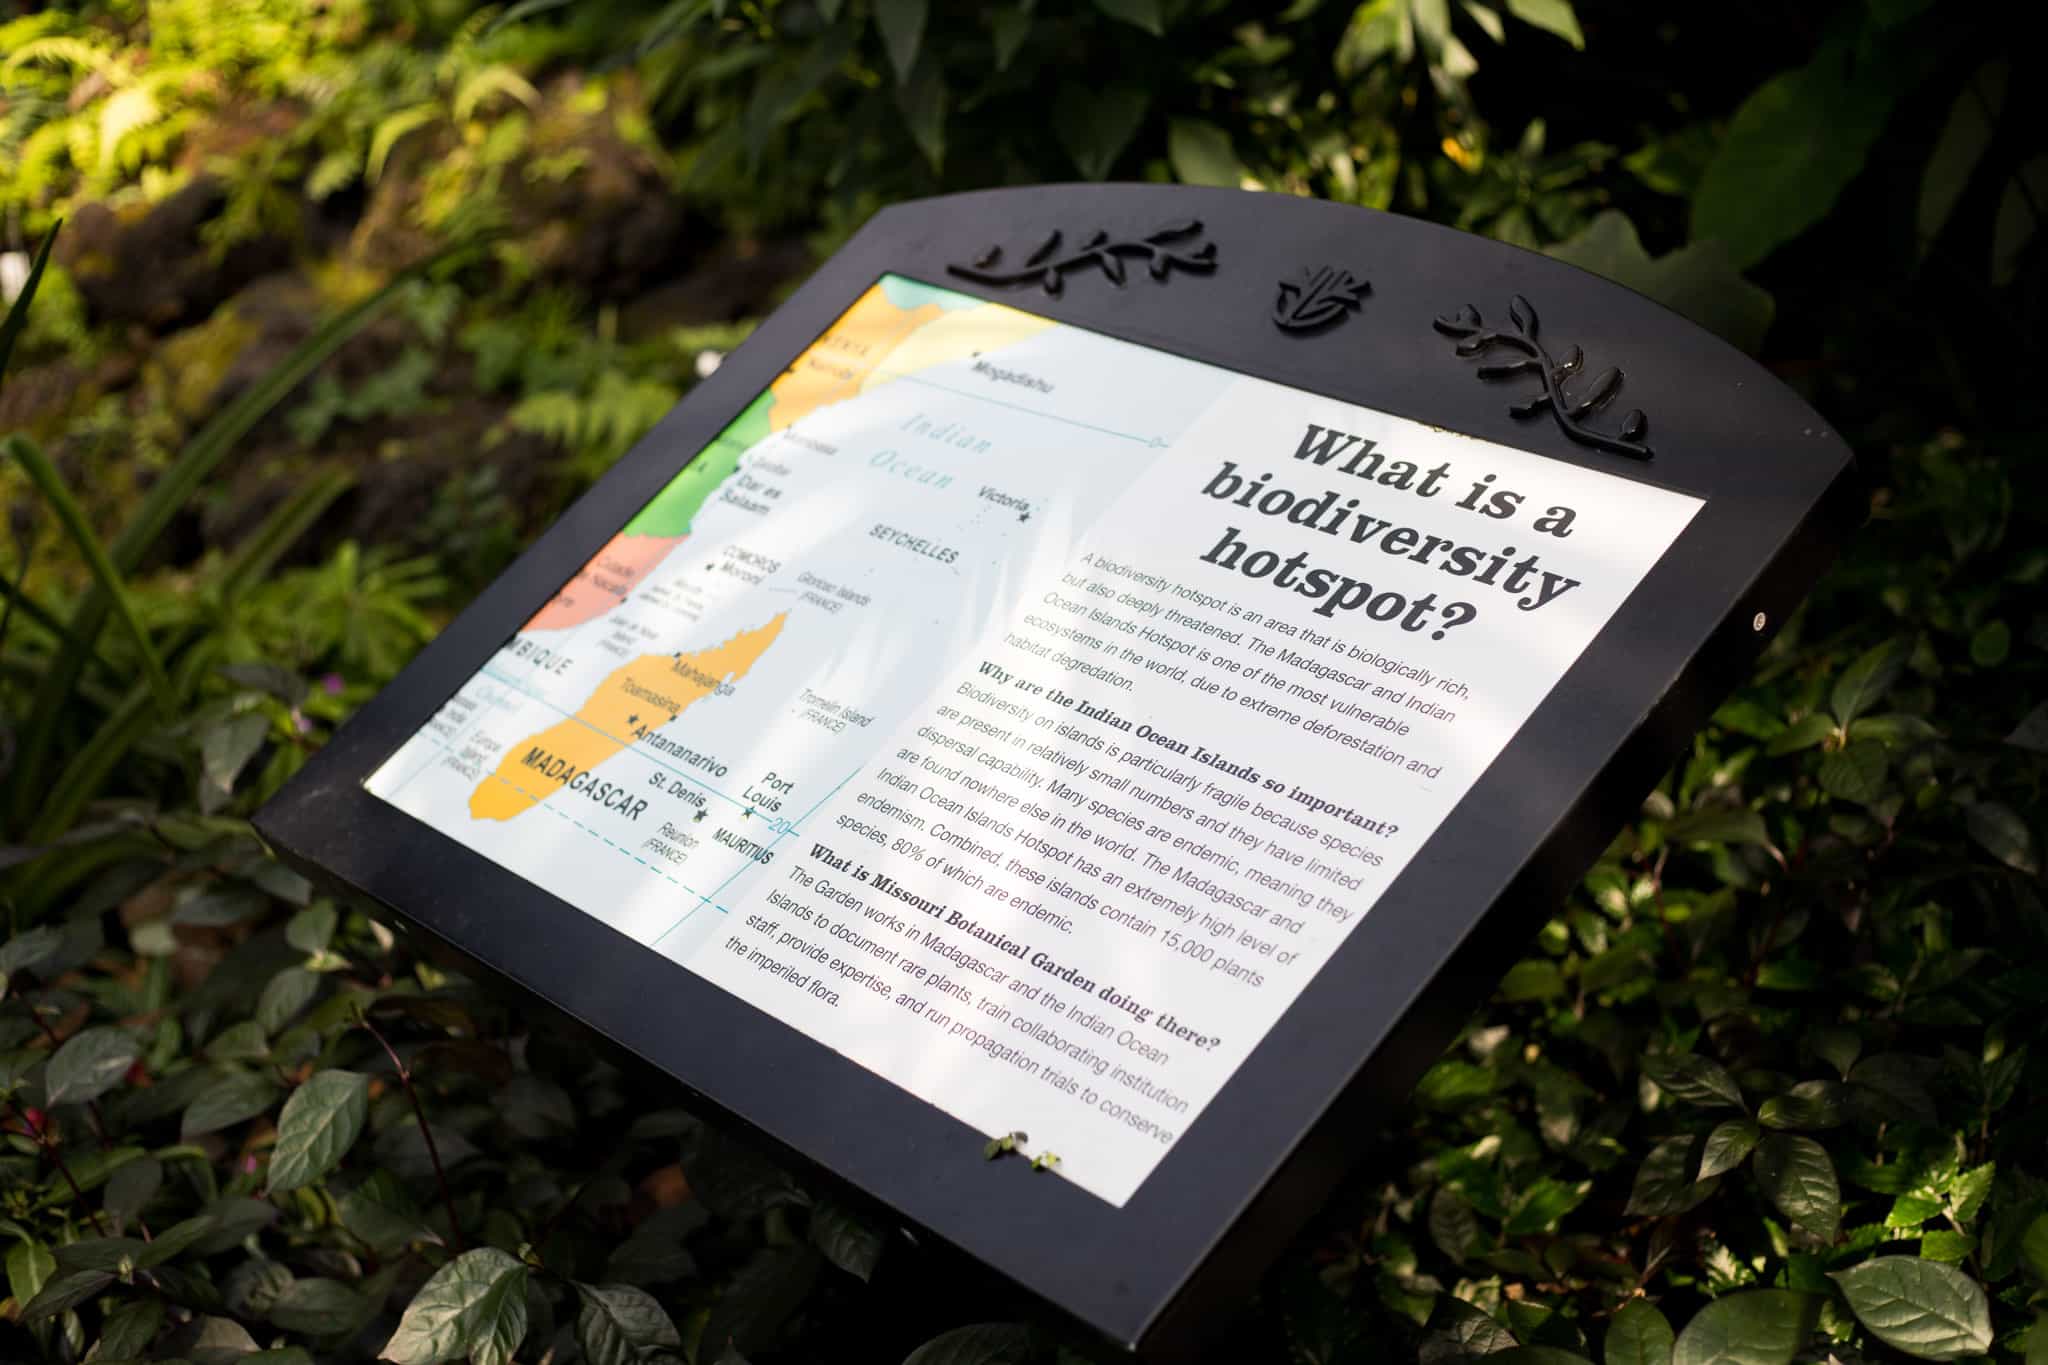 Interpretive sign teaching about biodiversity in plants